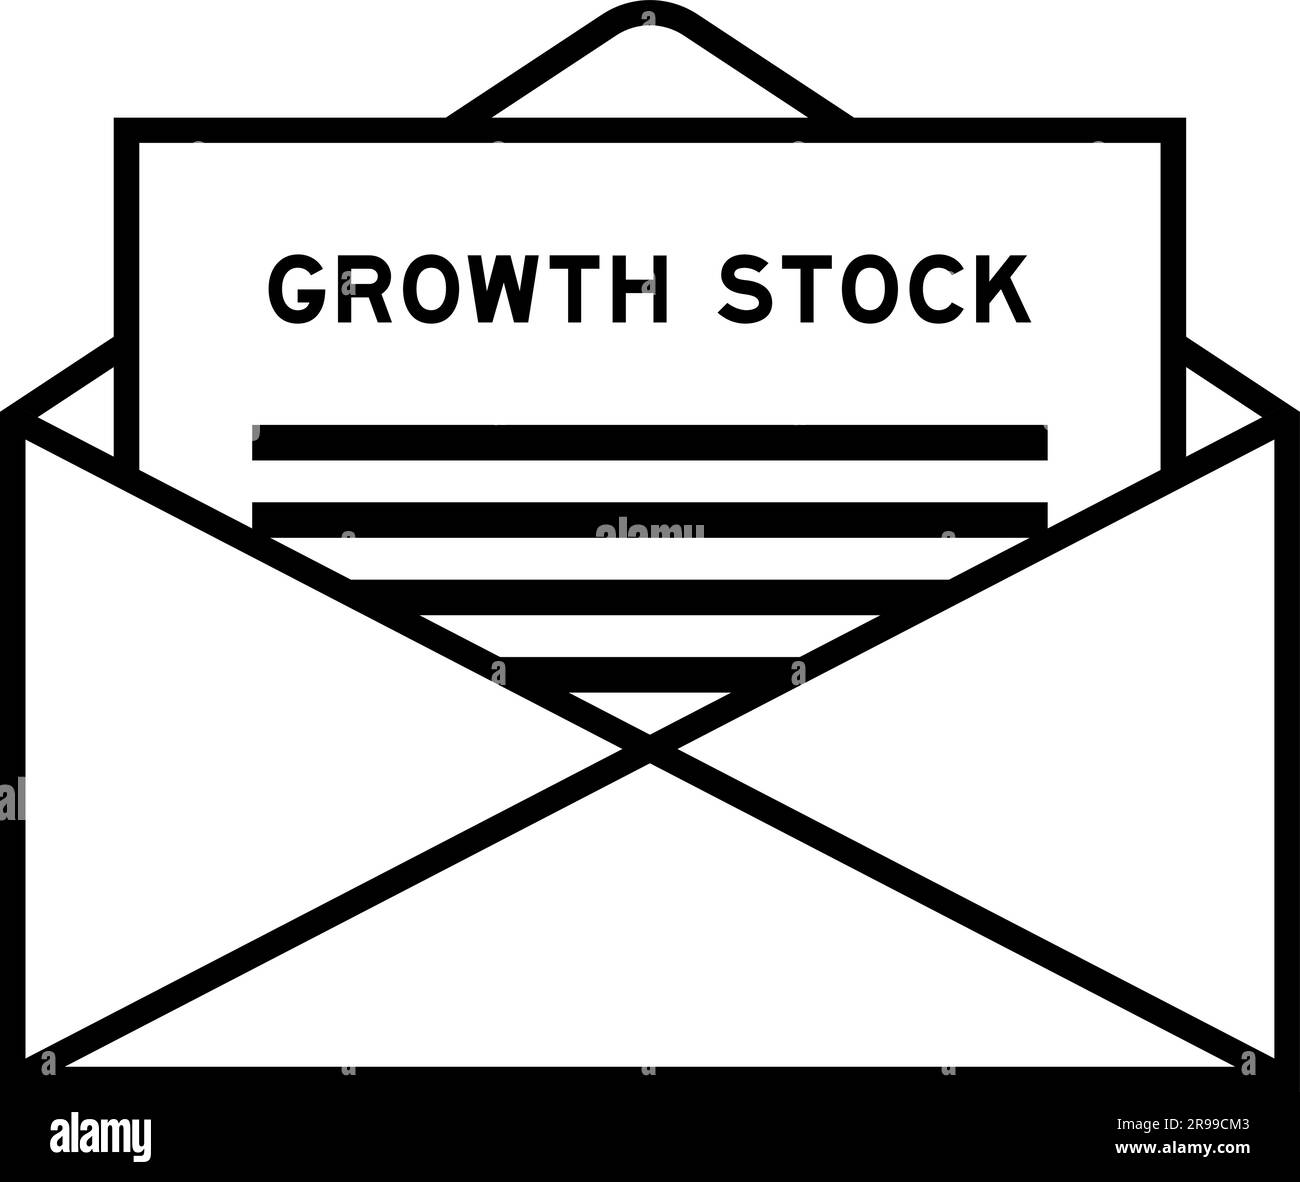 Envelope and letter sign with word growth stock as the headline Stock Vector